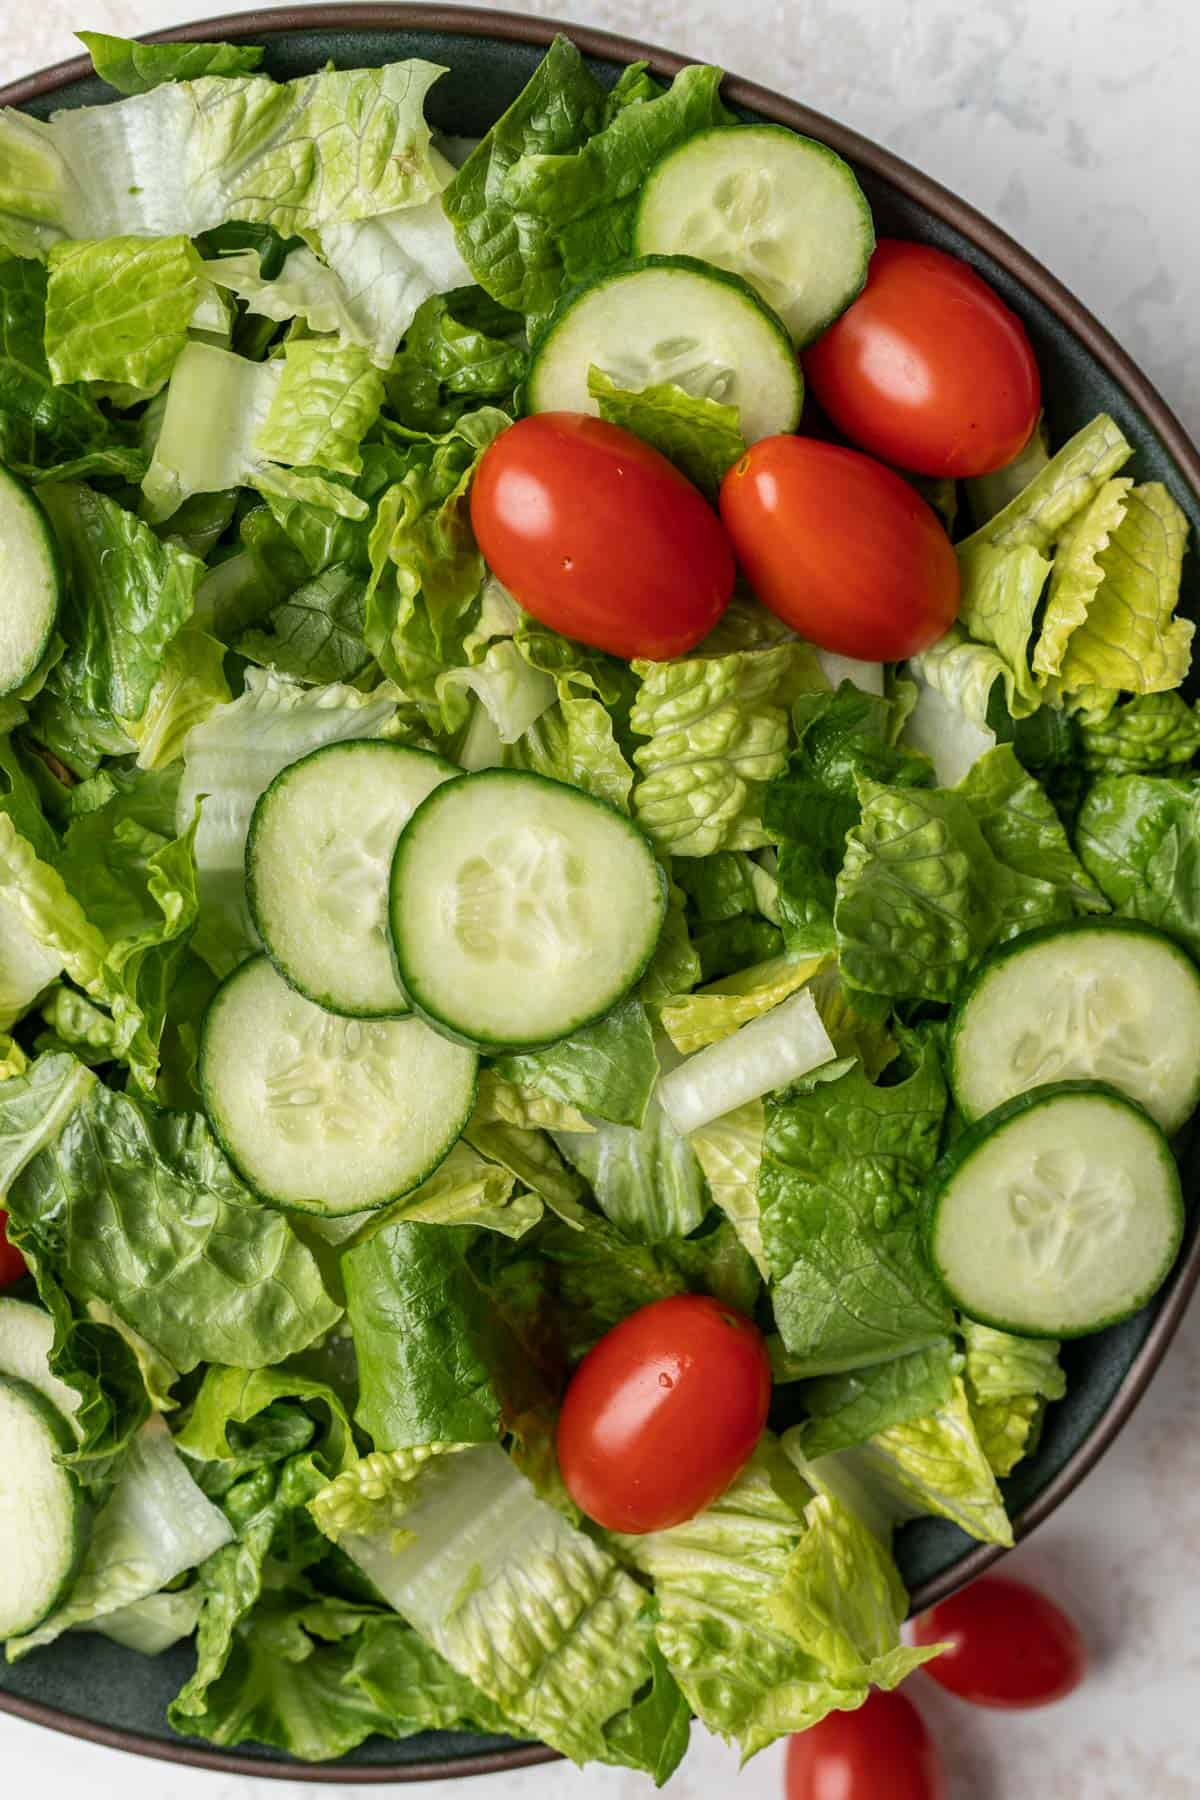 A salad made of romaine lettuce, cherry tomatoes, and cucumbers.